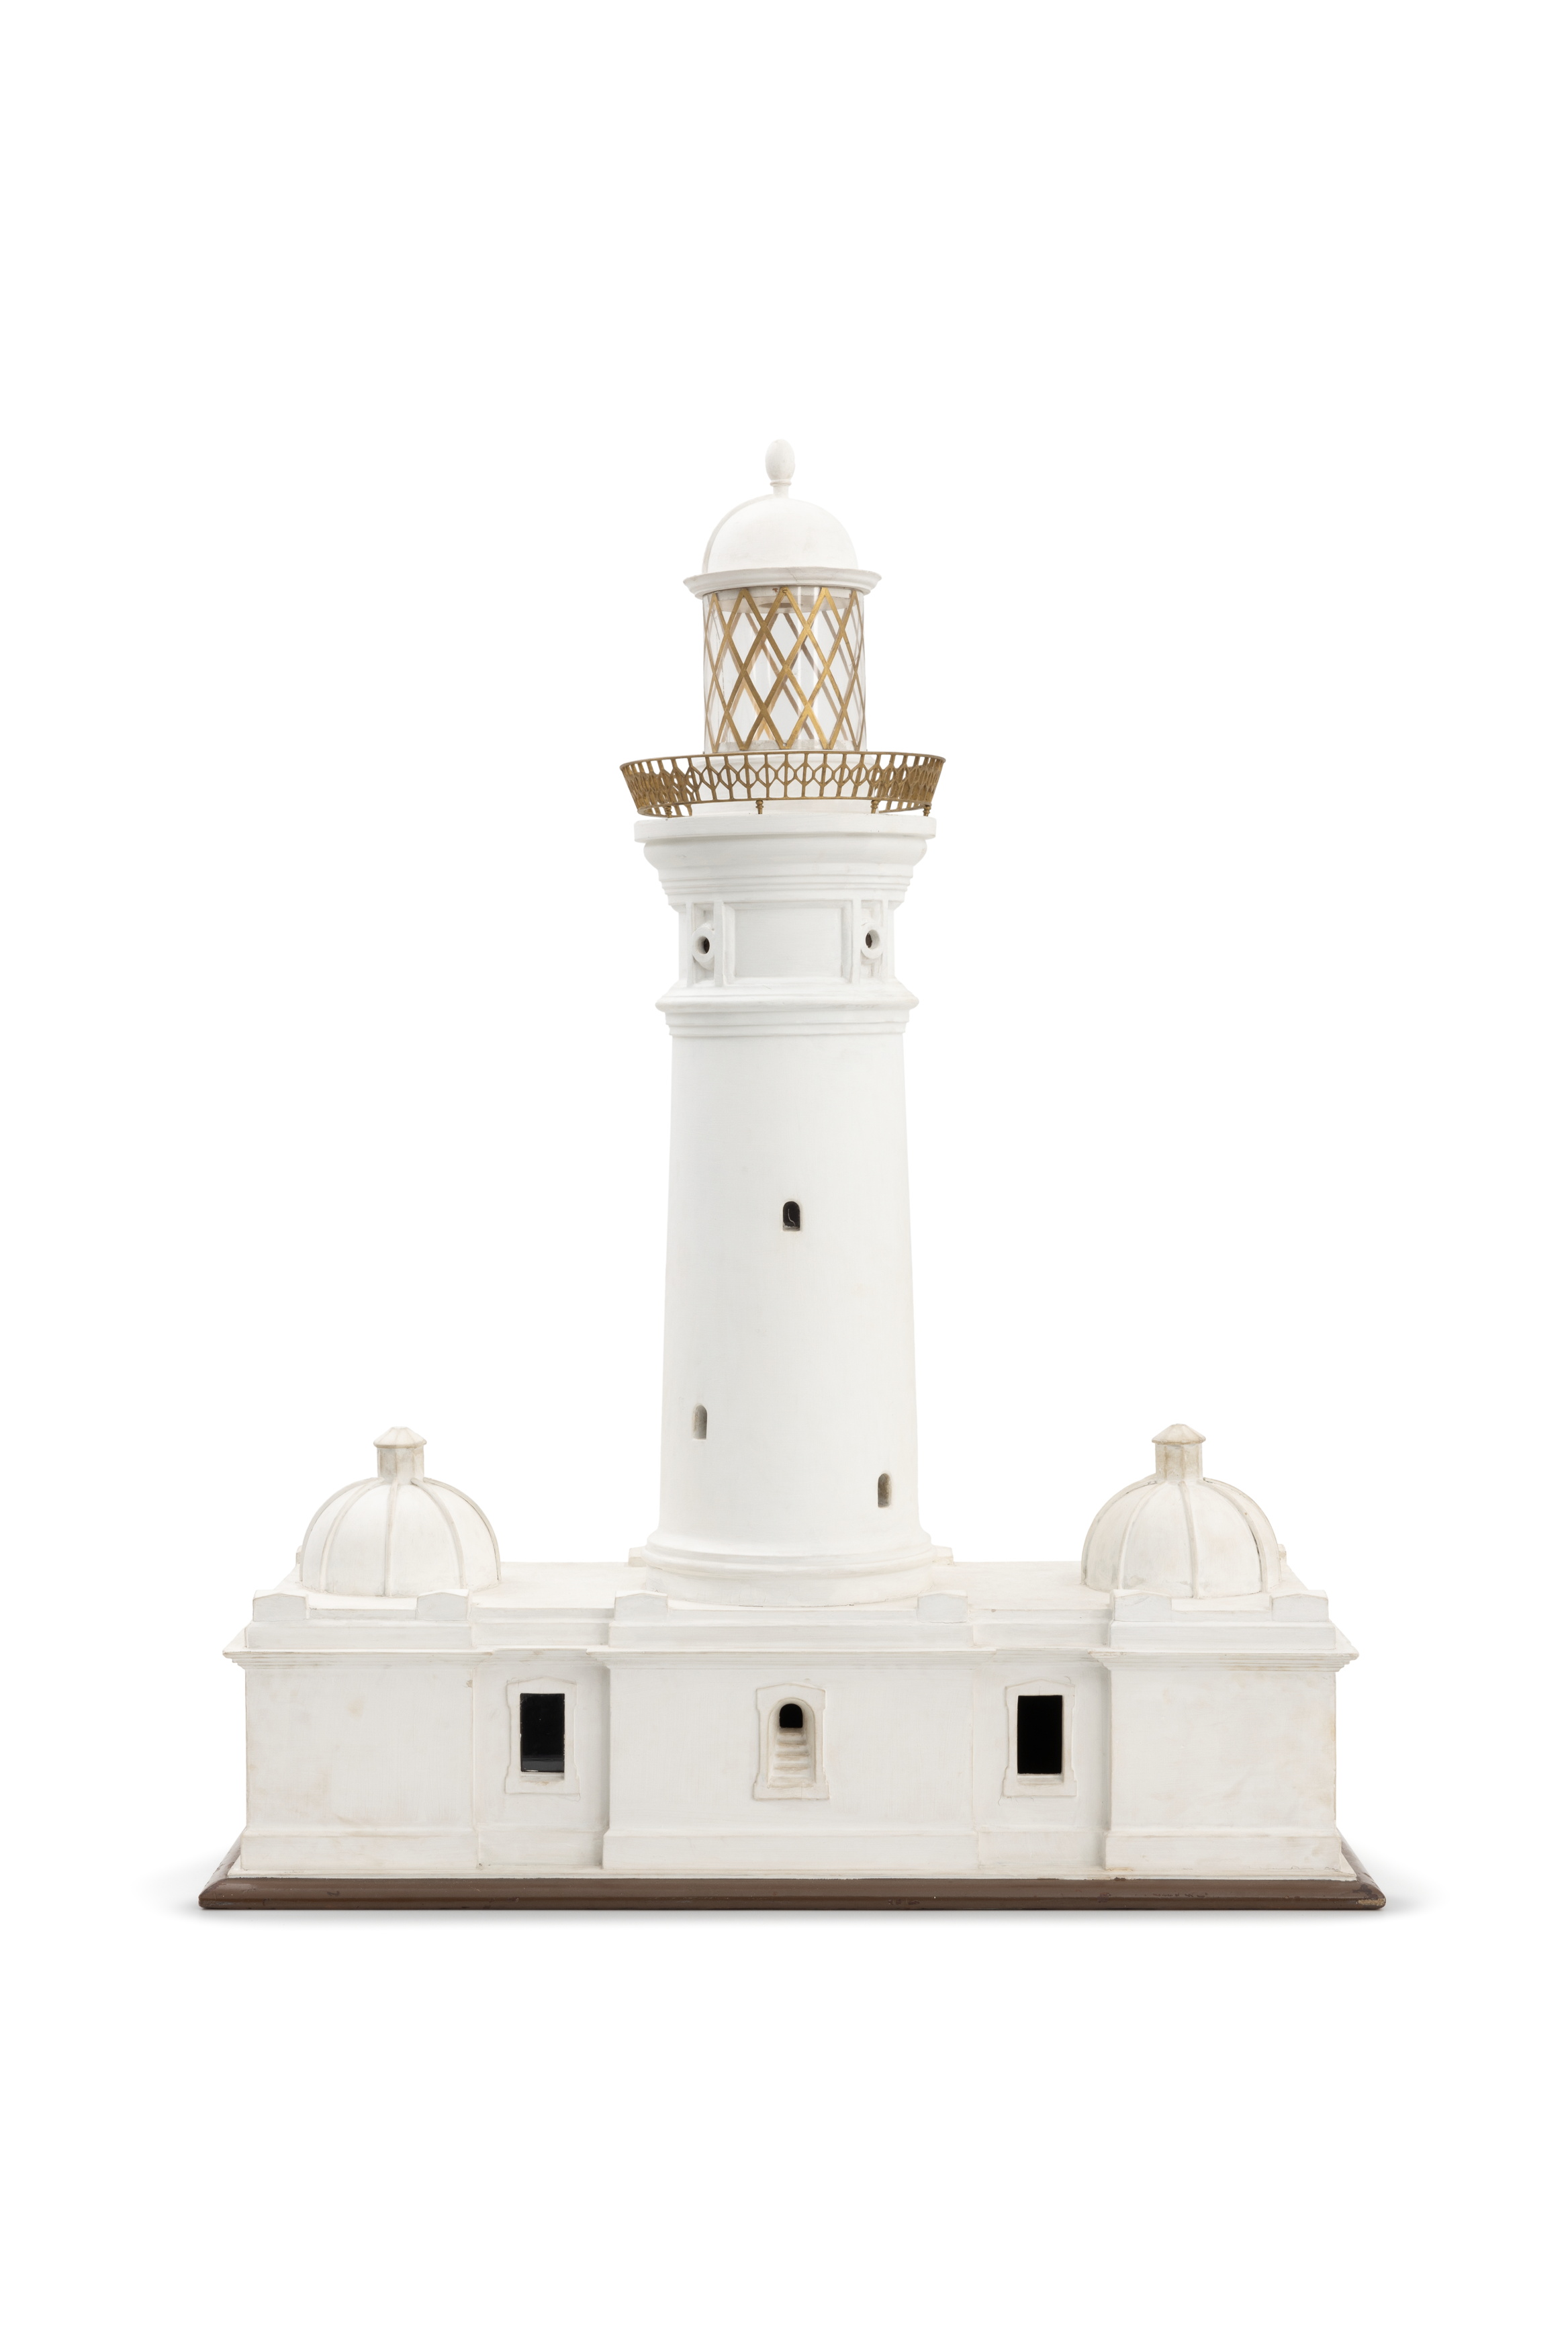 Architectural model, Macquarie Lighthouse, c.1880